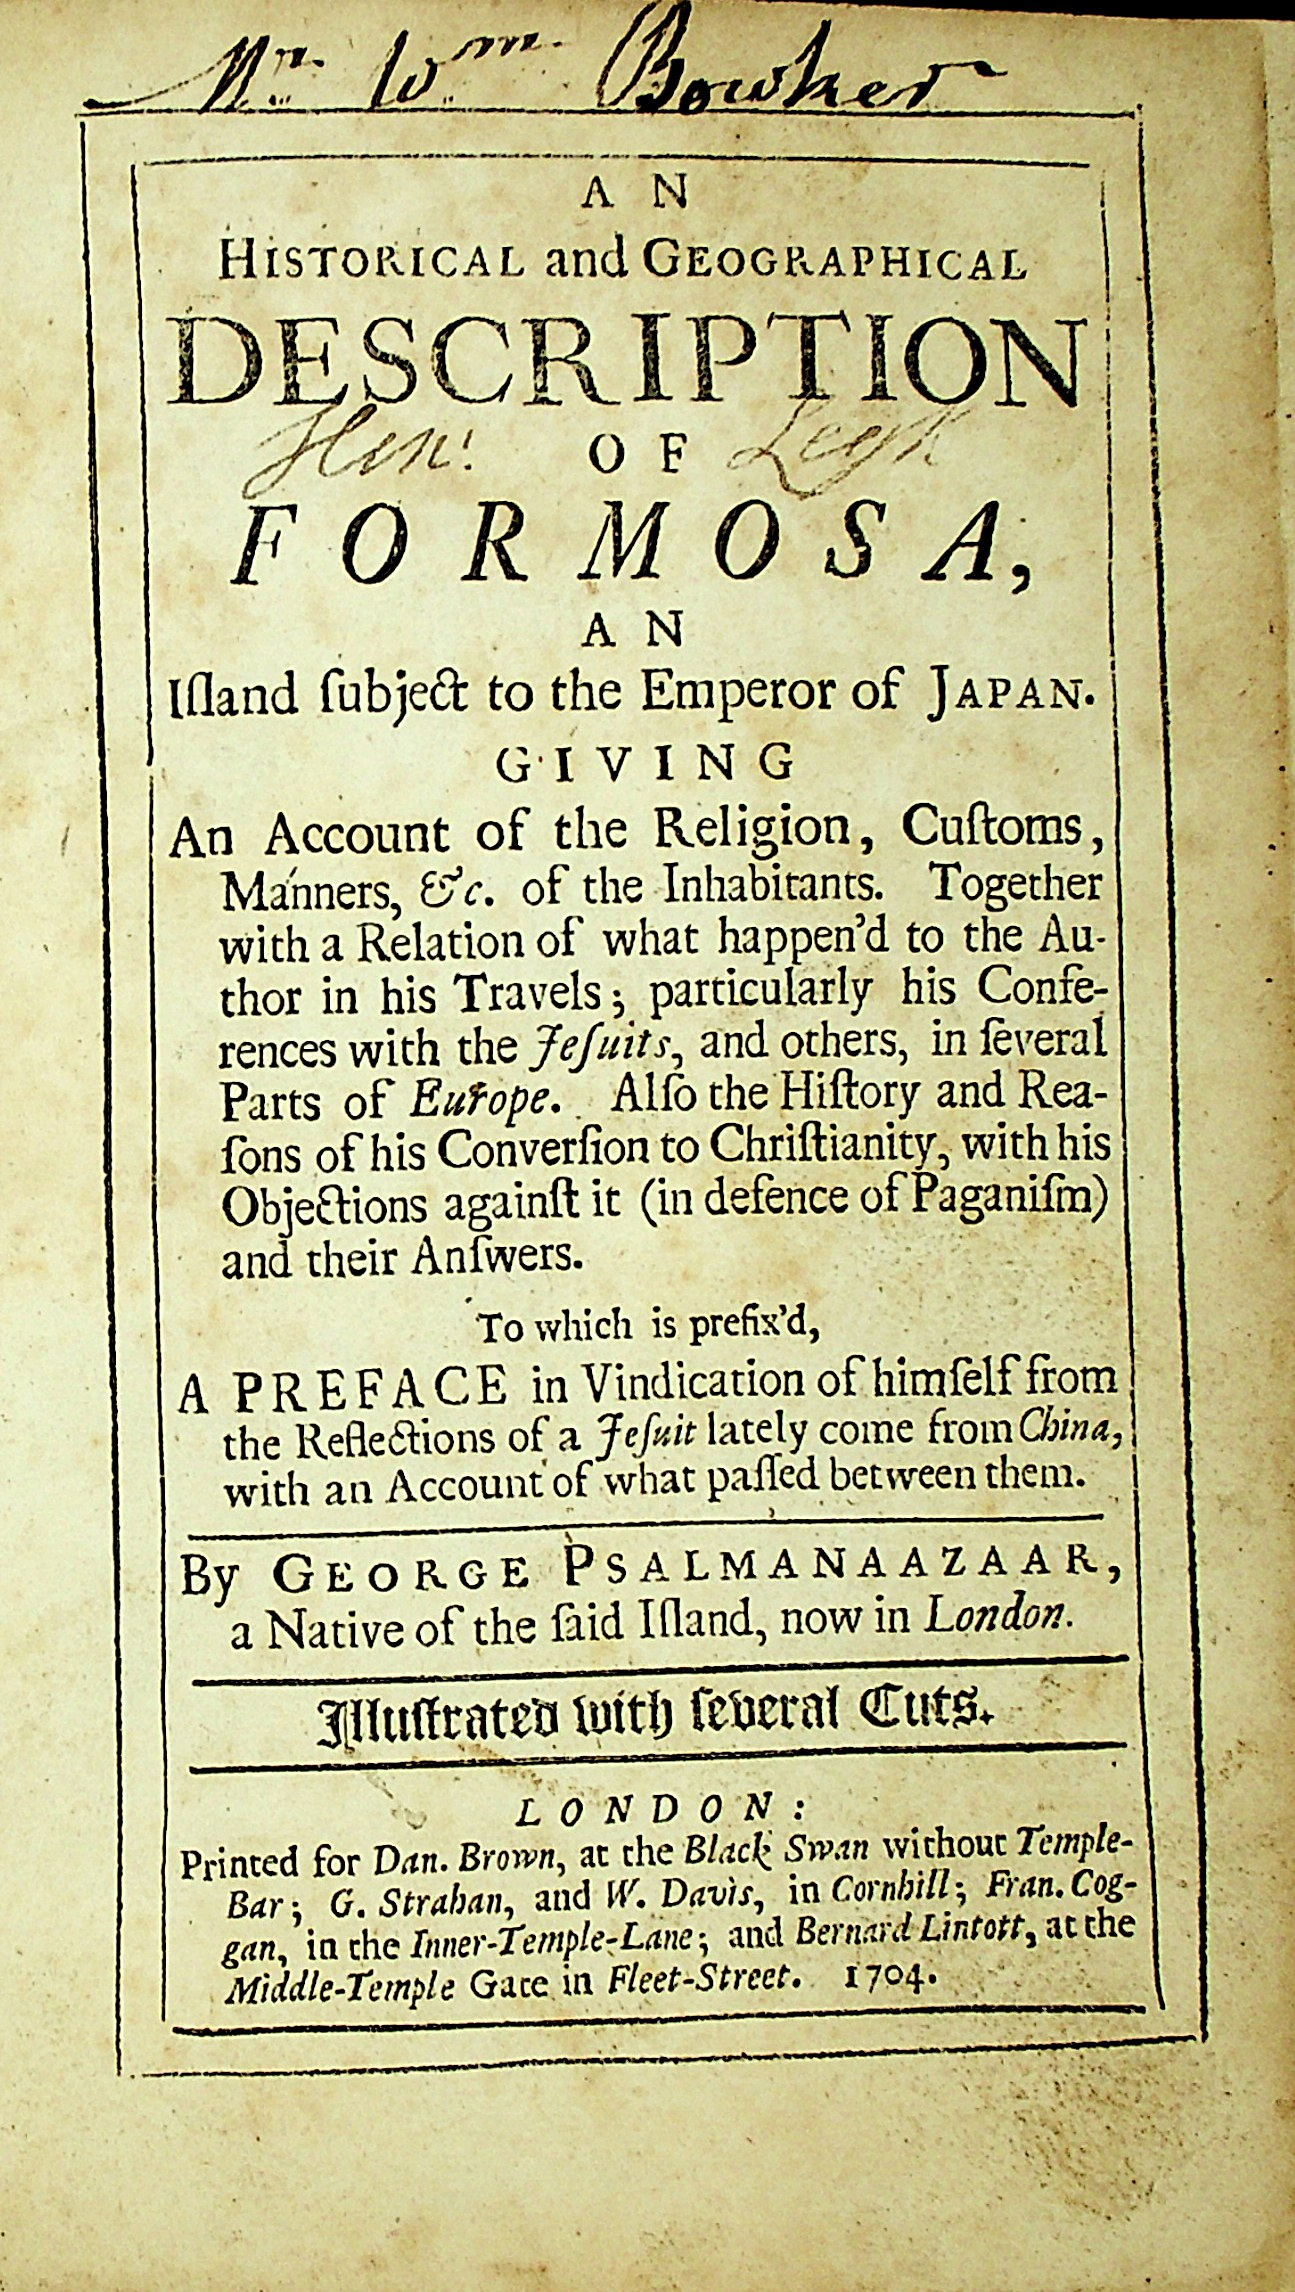 An historical and geographical description of Formosa : an island subject to the emperor of Japan : Giving an account of the religion, customs, manners, &c., of the inhabitants. Together with a relation of what happen'd to the author in his travels; particularly his conferences with the Jesuits, and others, in several parts of Europe. Also the history and reasons of his conversion to Christianity, with his objections against it (in defence of paganism) and their answers ... 